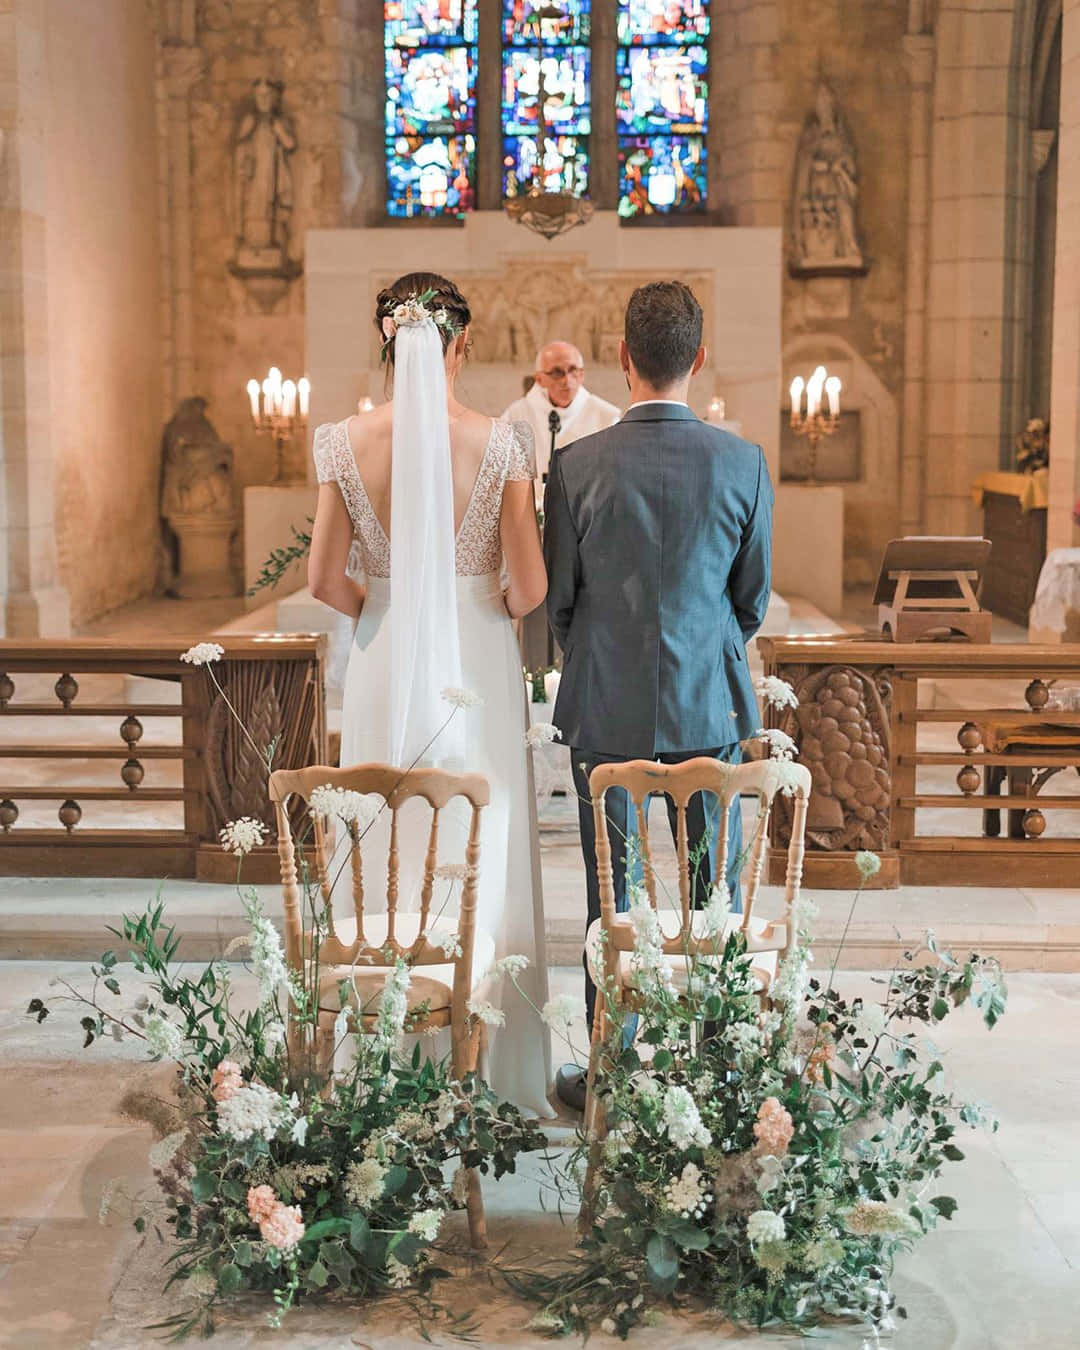 A Bride And Groom Standing In A Church